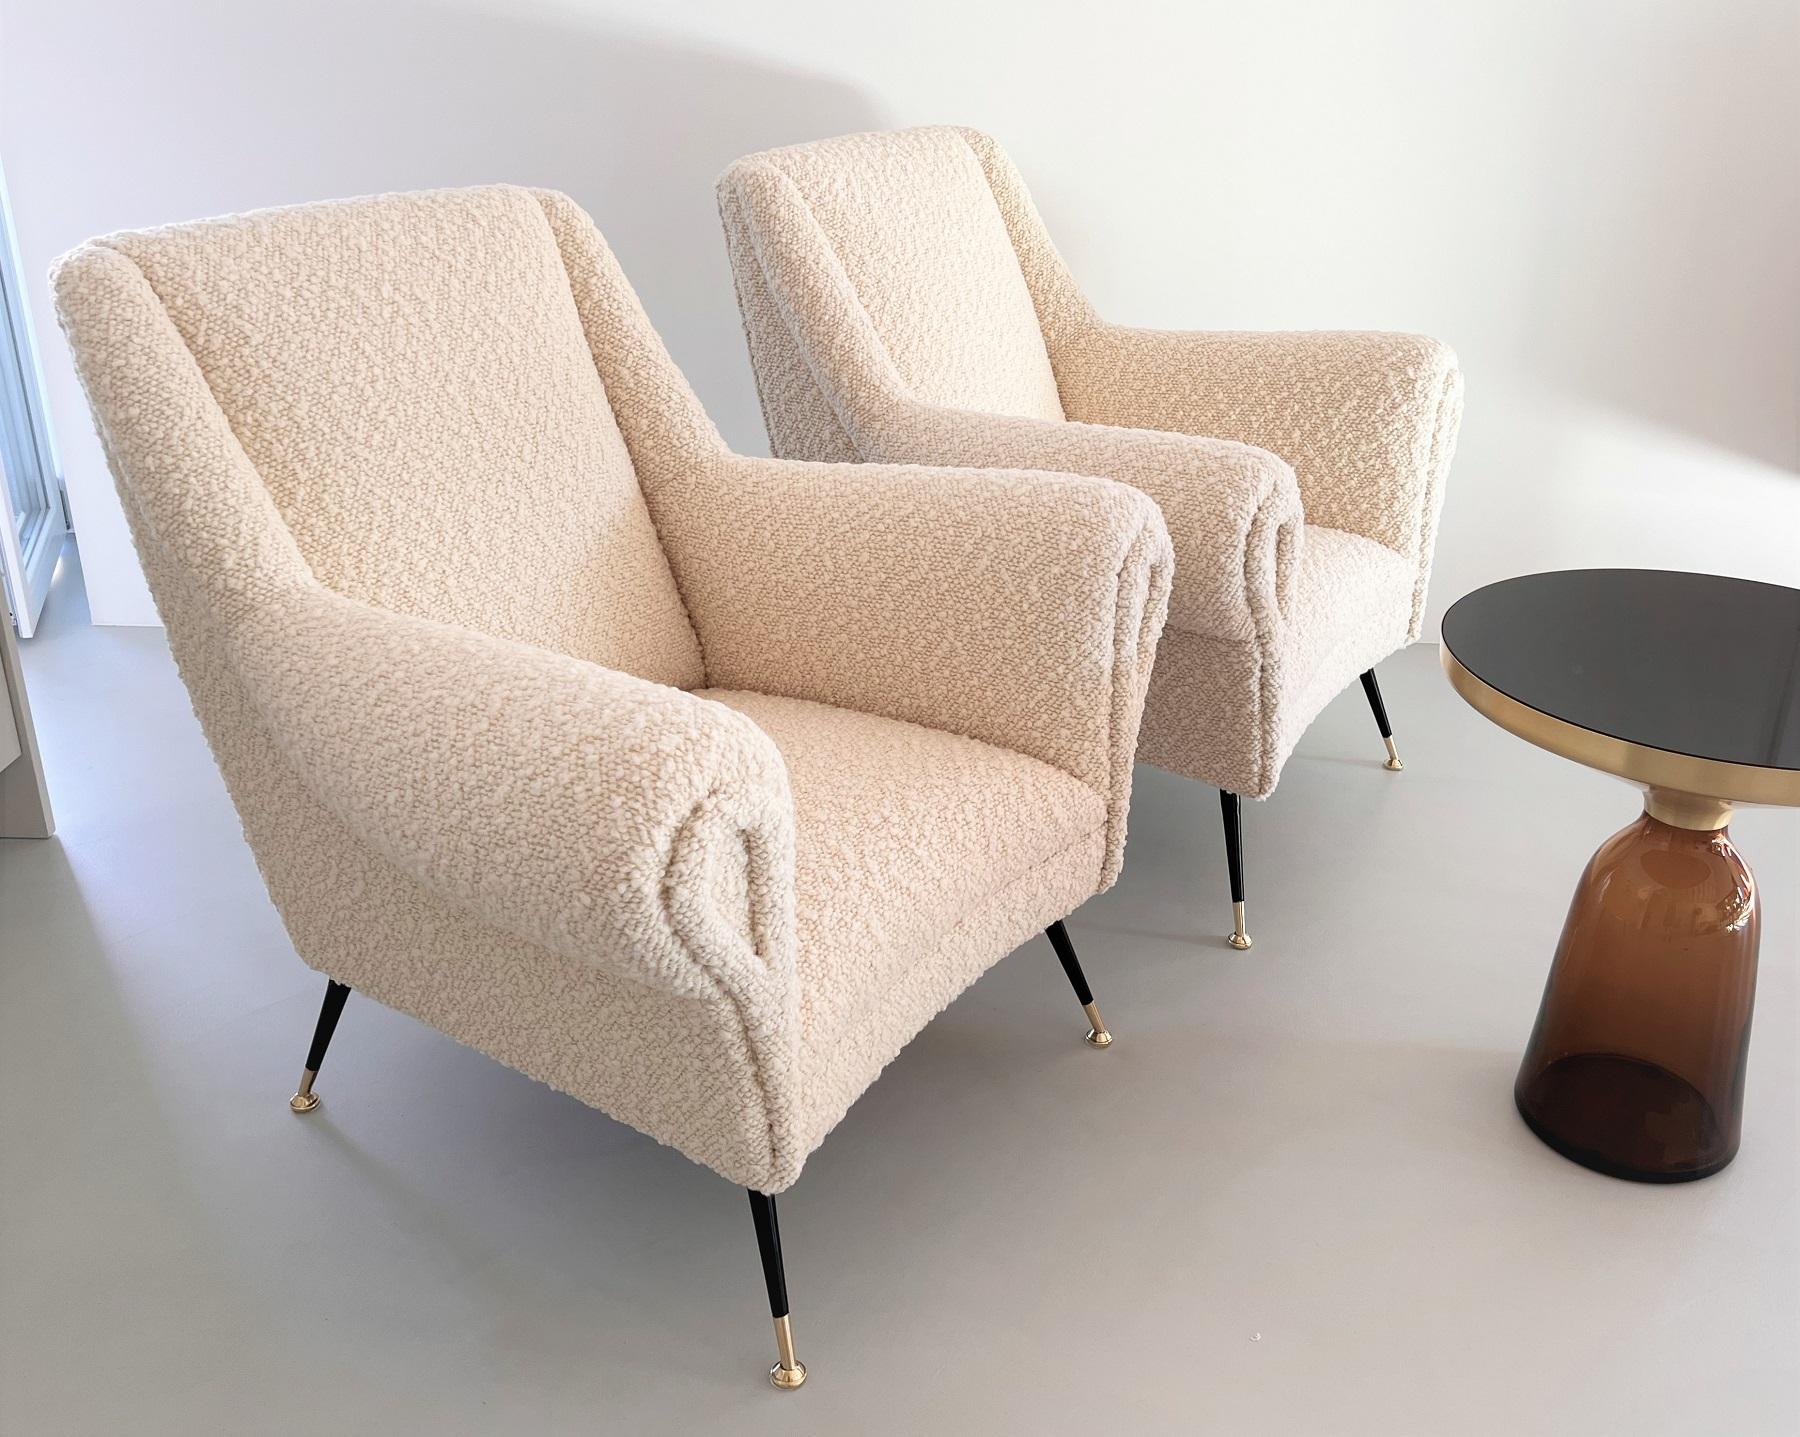 Late 20th Century Italian Midcentury Armchairs with new Bouclé Upholstery and Brass Feet, 1970s